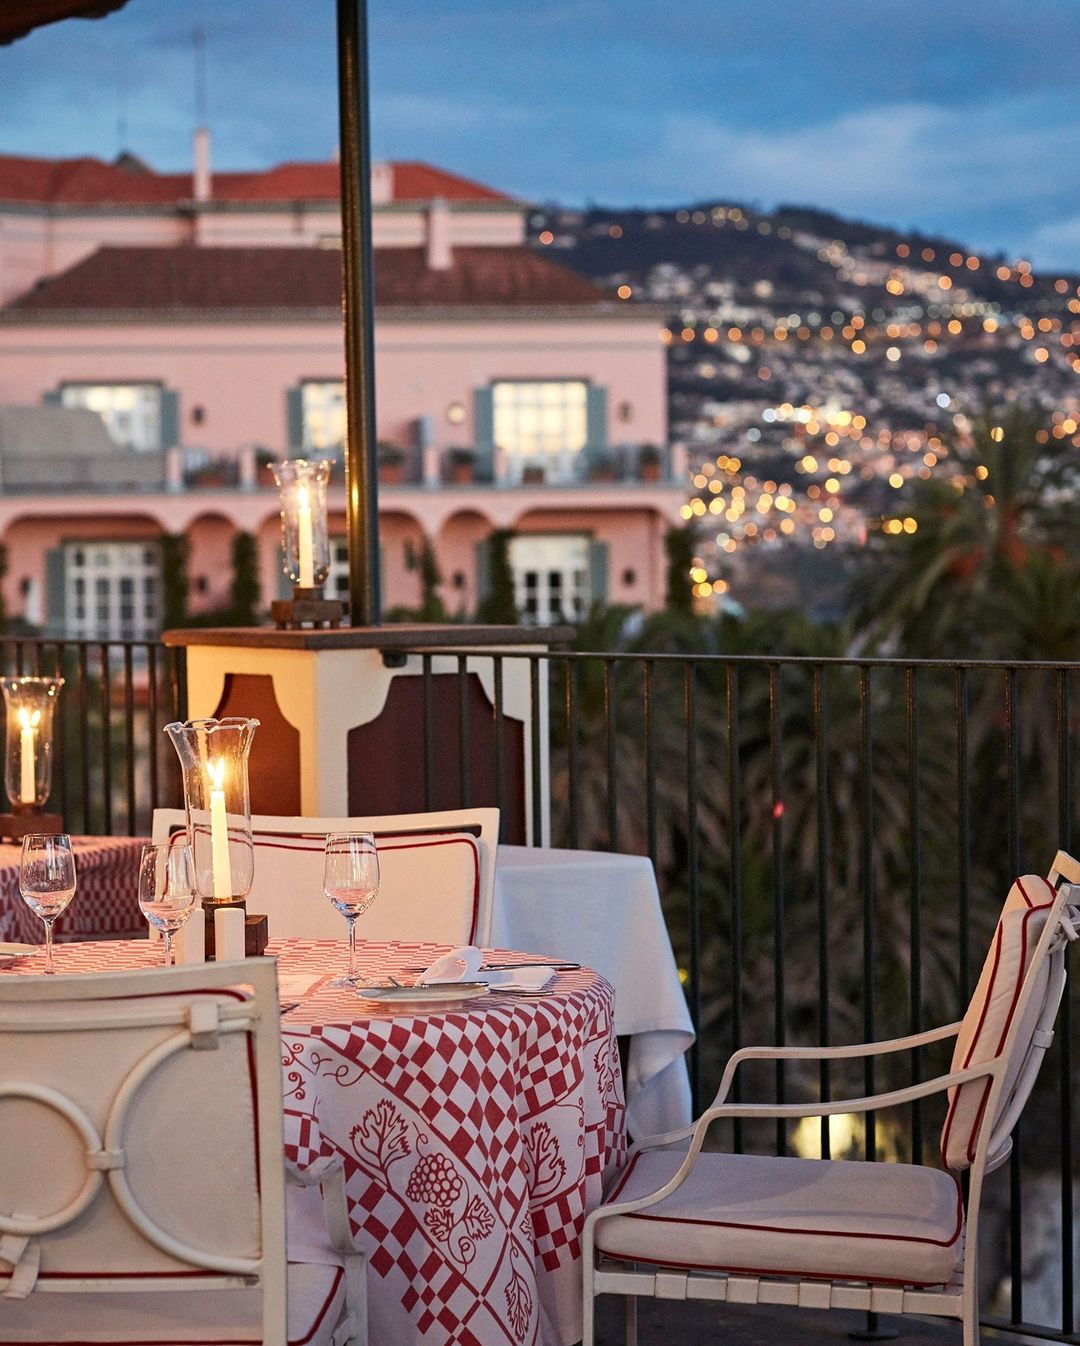 Overlooking the jagged coastline of Funchal Harbour, Reid's Palace is home to Ristorante Villa Cipriani, a slice of Italy brought to Madeira